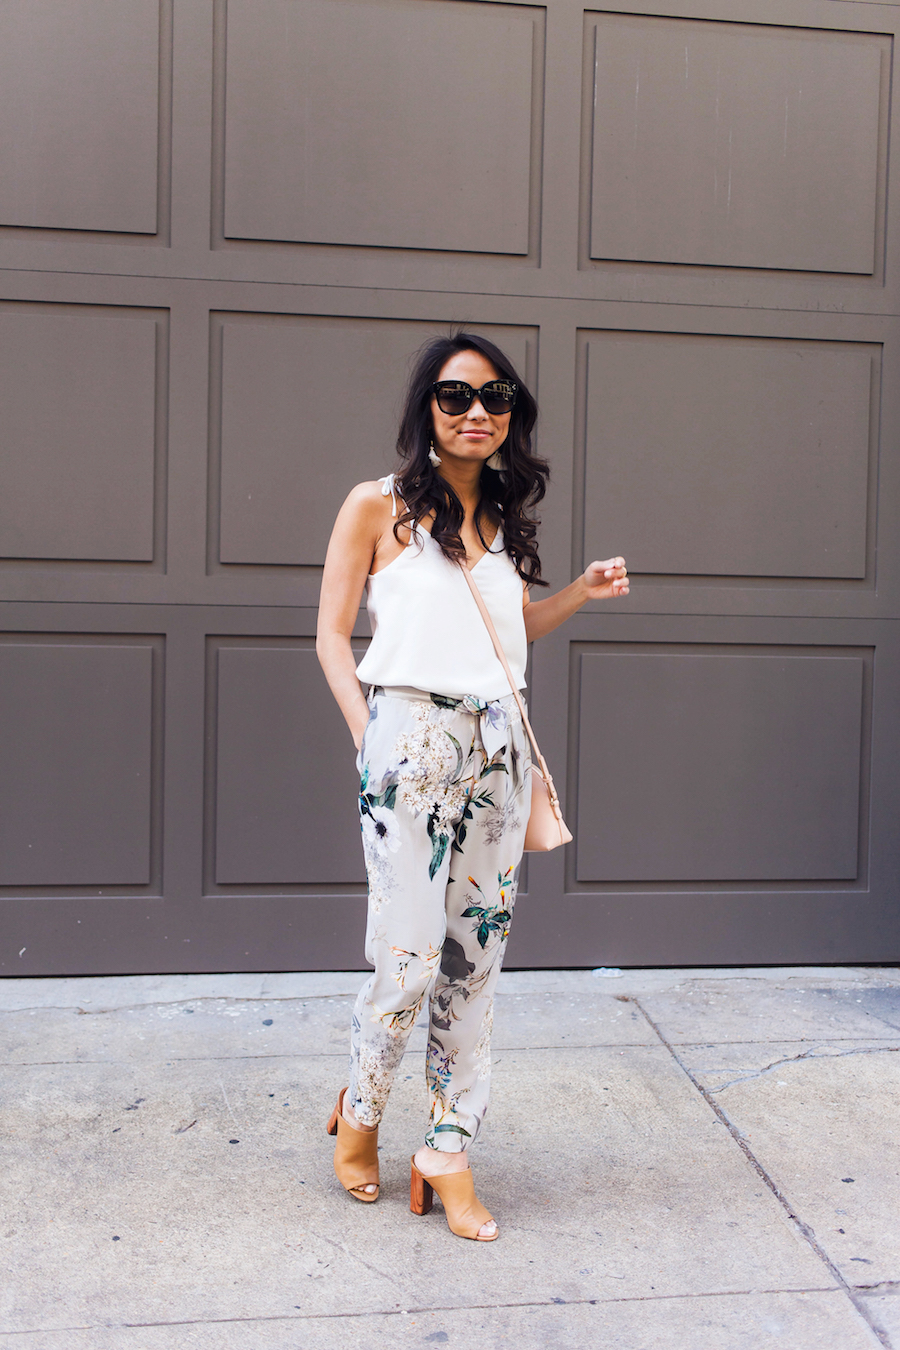 river island petites, petite pants, floral pants, mules, spring outfit ideas, the view from 5 ft. 2